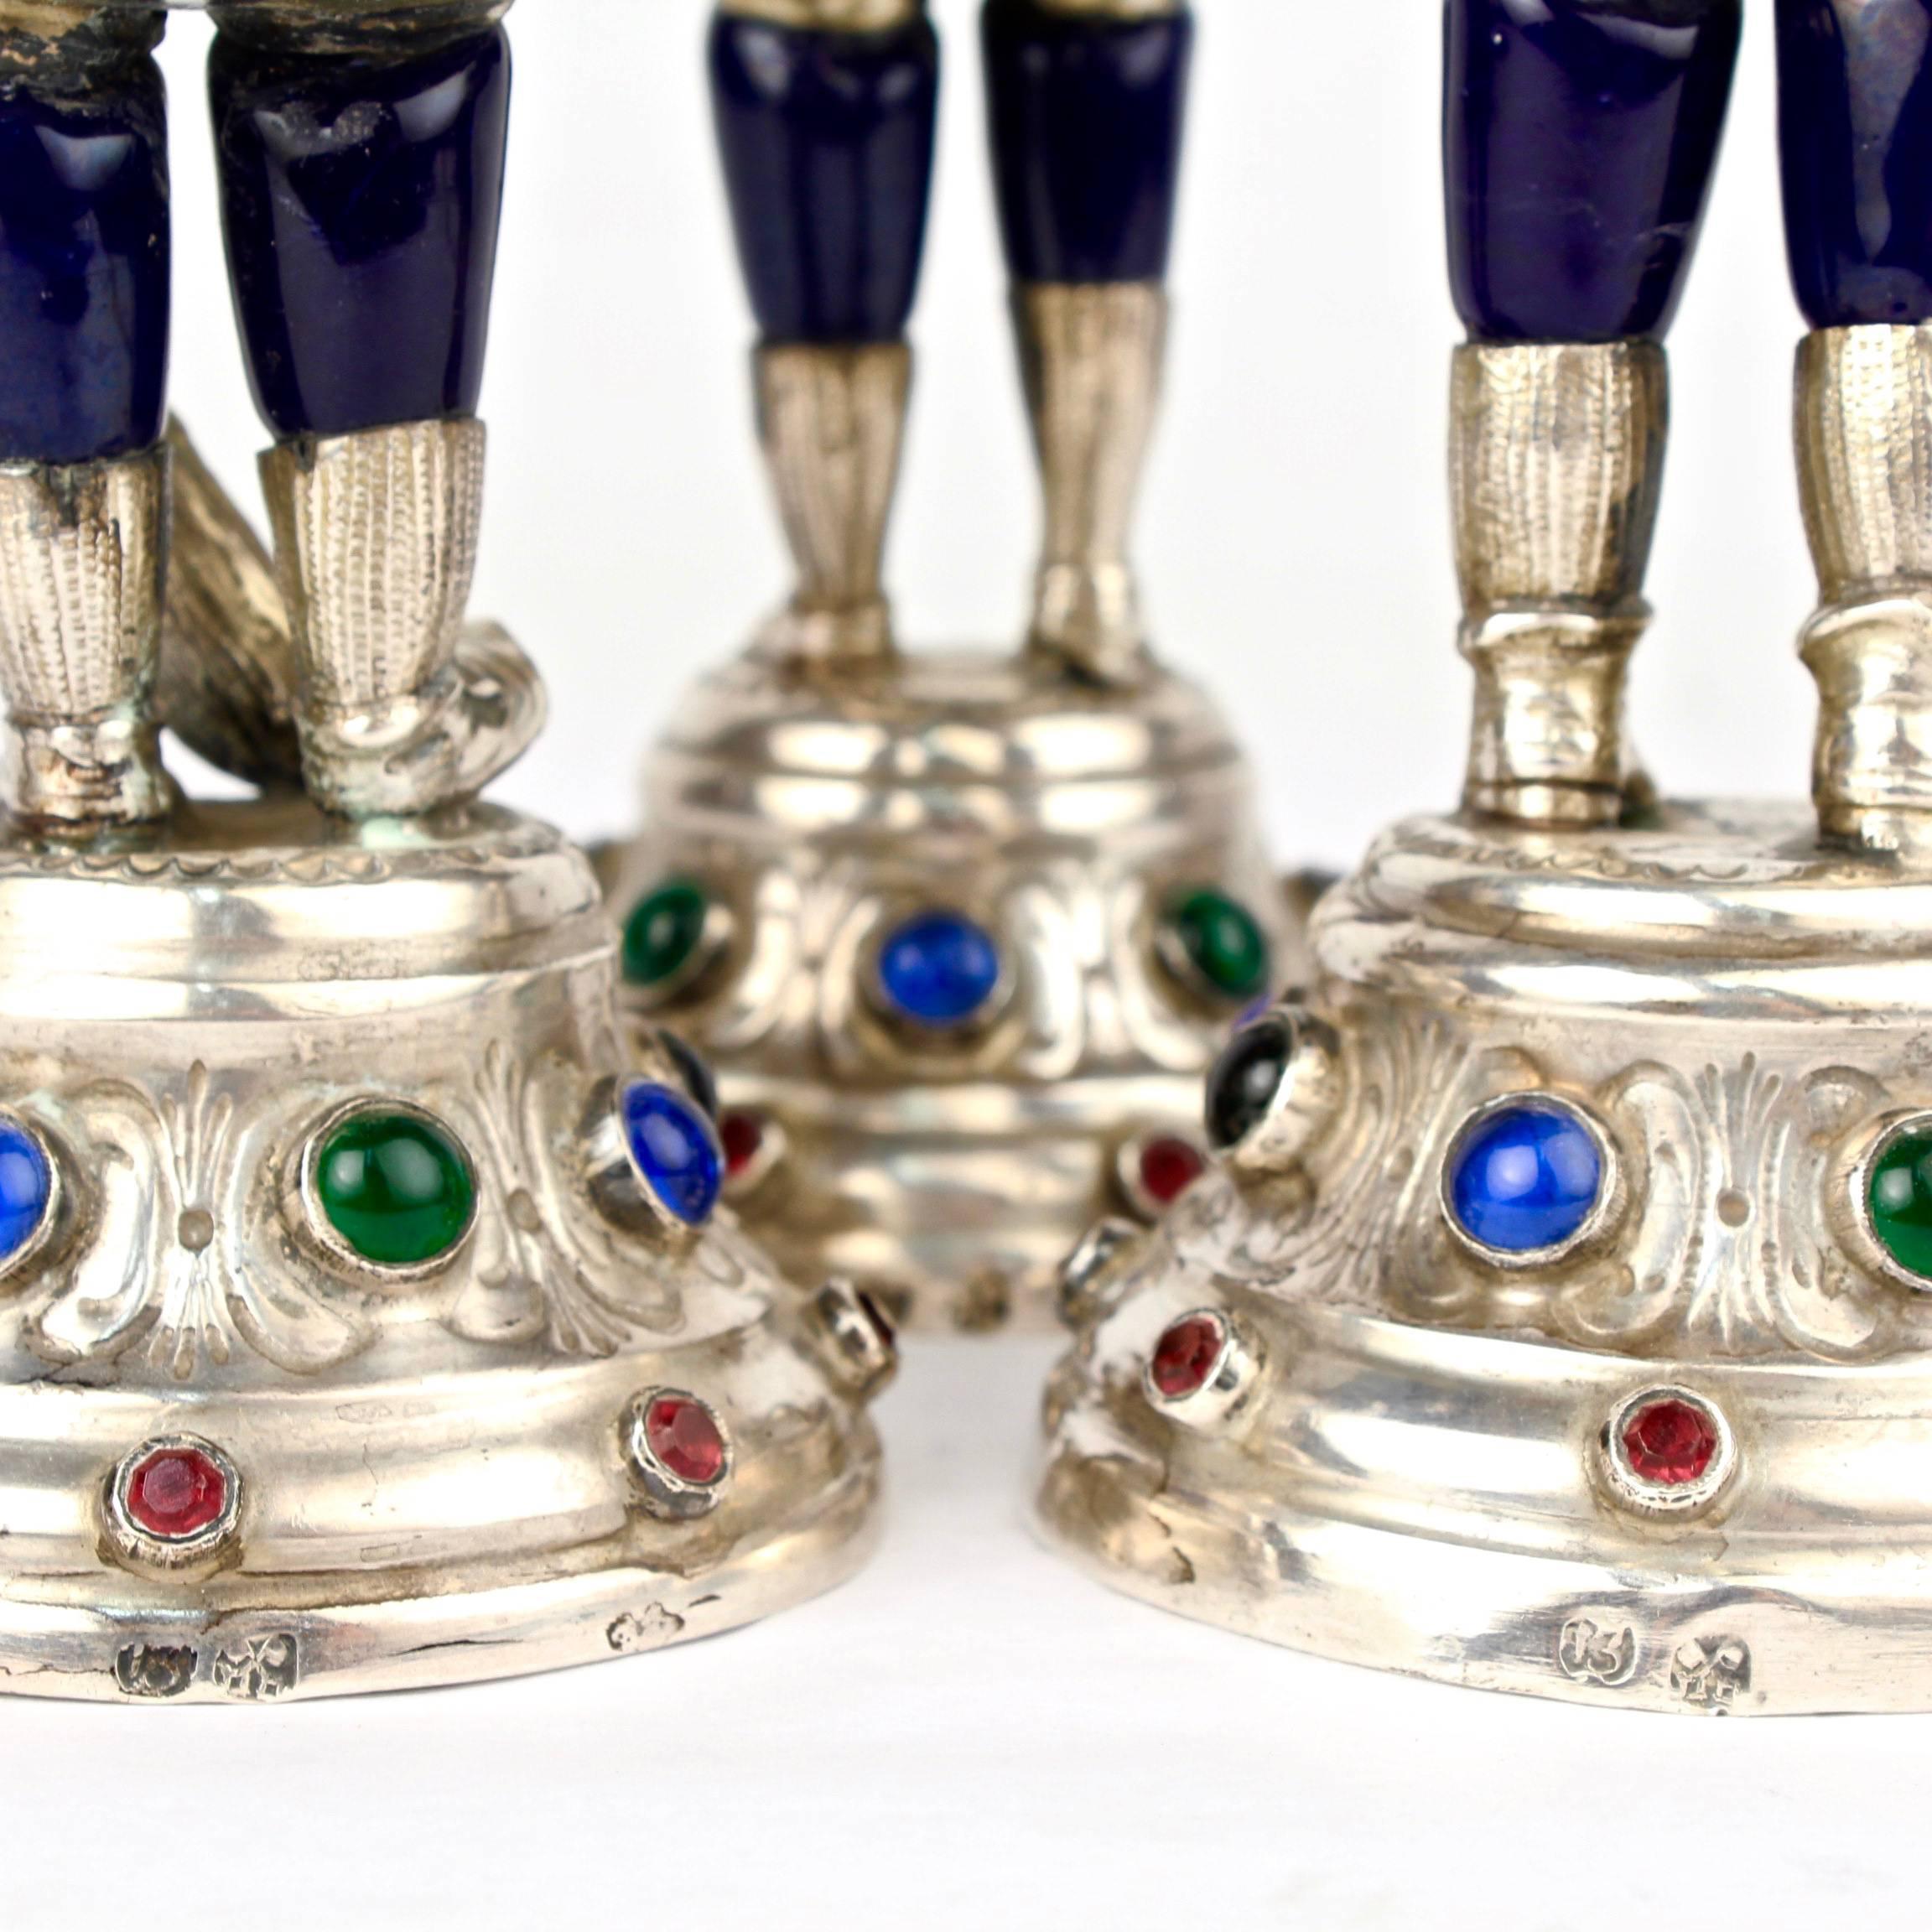 Three 19th Century Jeweled & Enameled German Coin Silver Musician Figurines For Sale 4